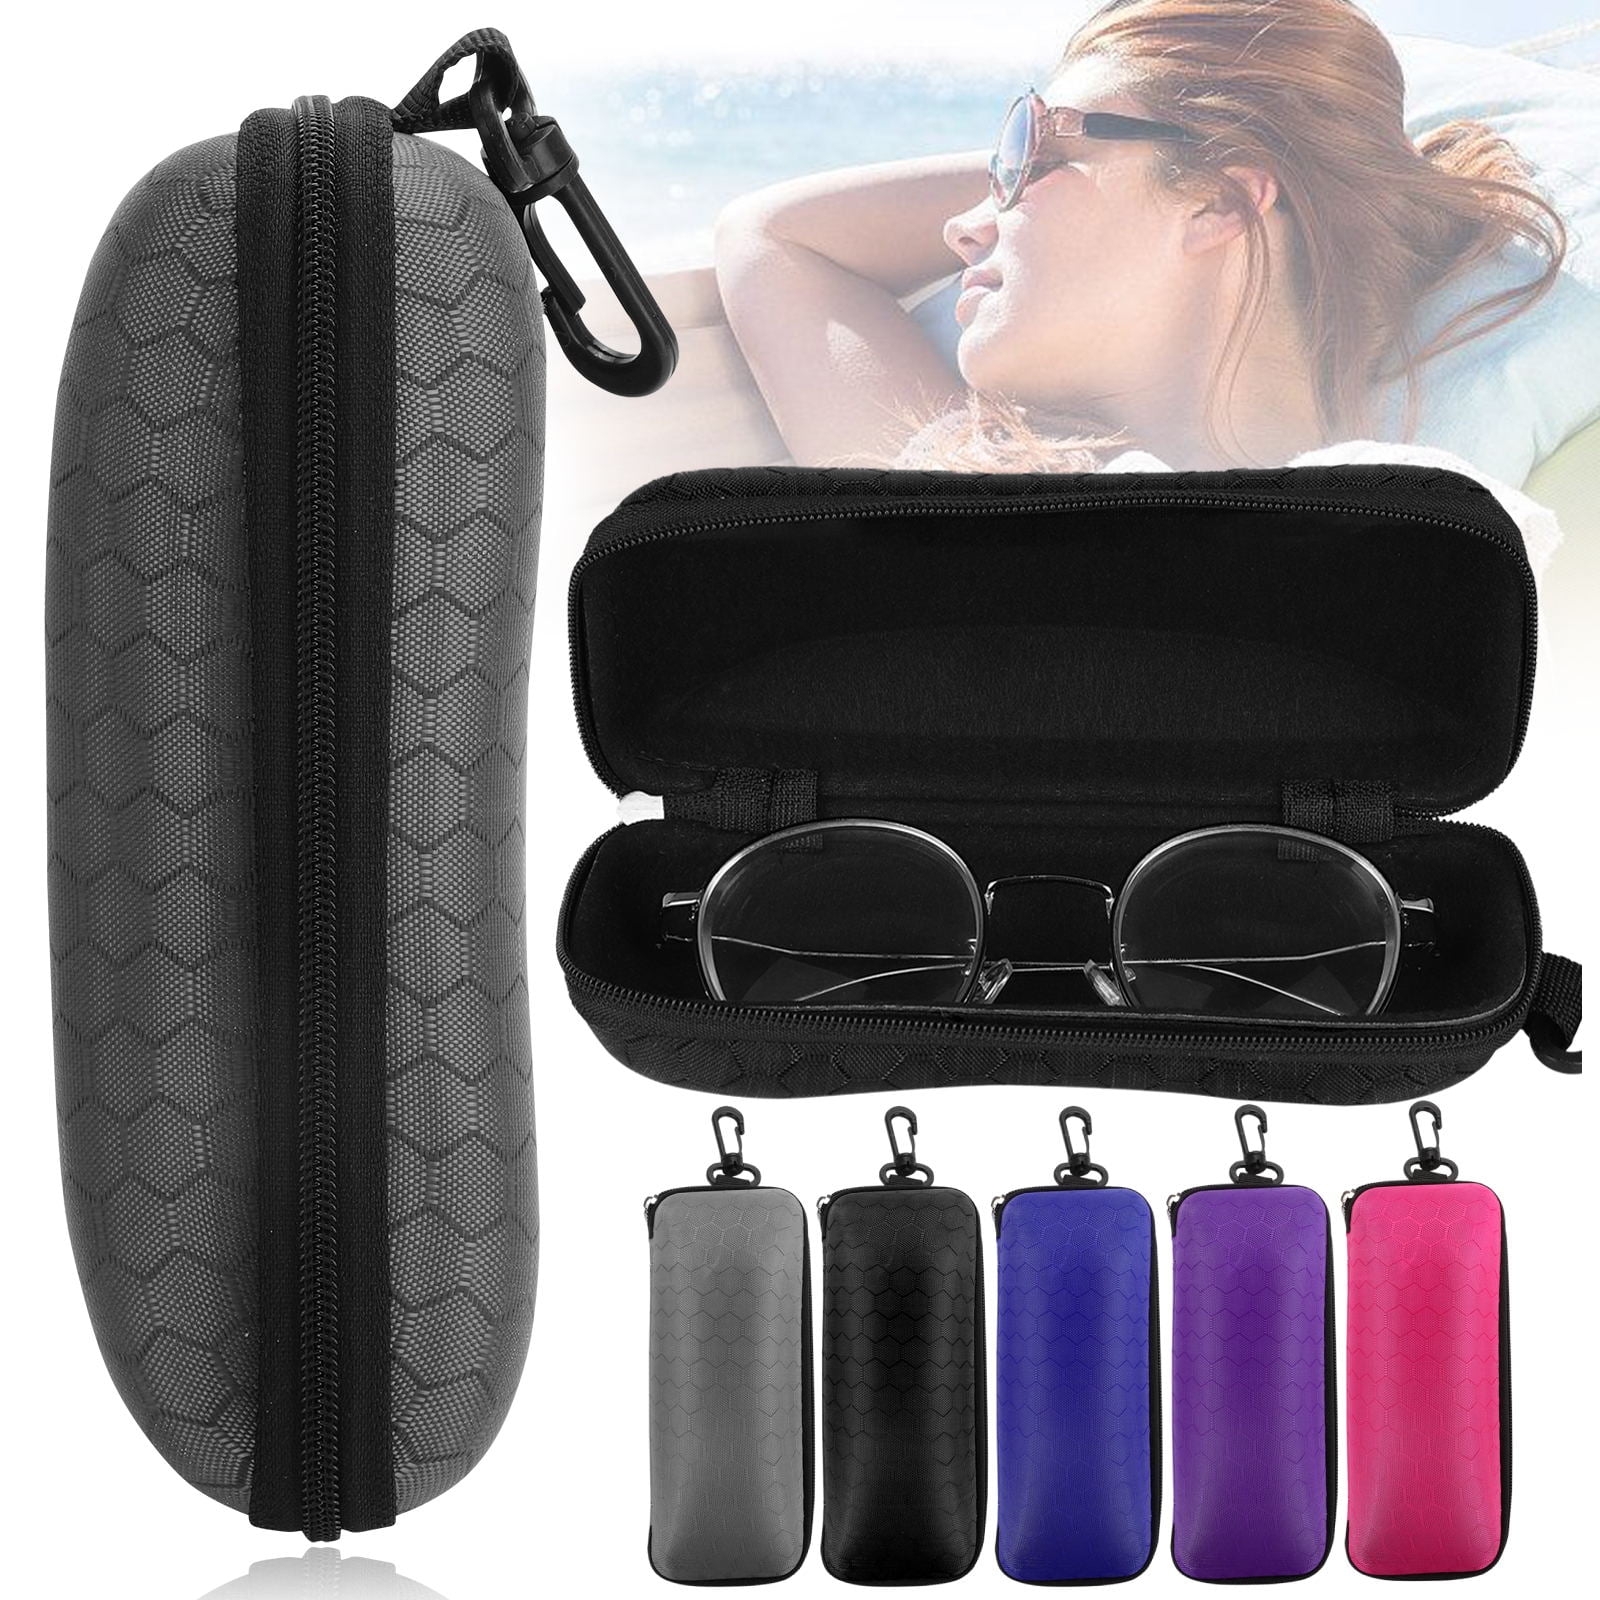 Portable Glasses Case Hard Eyeglass Box with Carabiner Hook Zipper Eyewear Sleeve Pouch Sunglasses Protector Cover For Women Men 